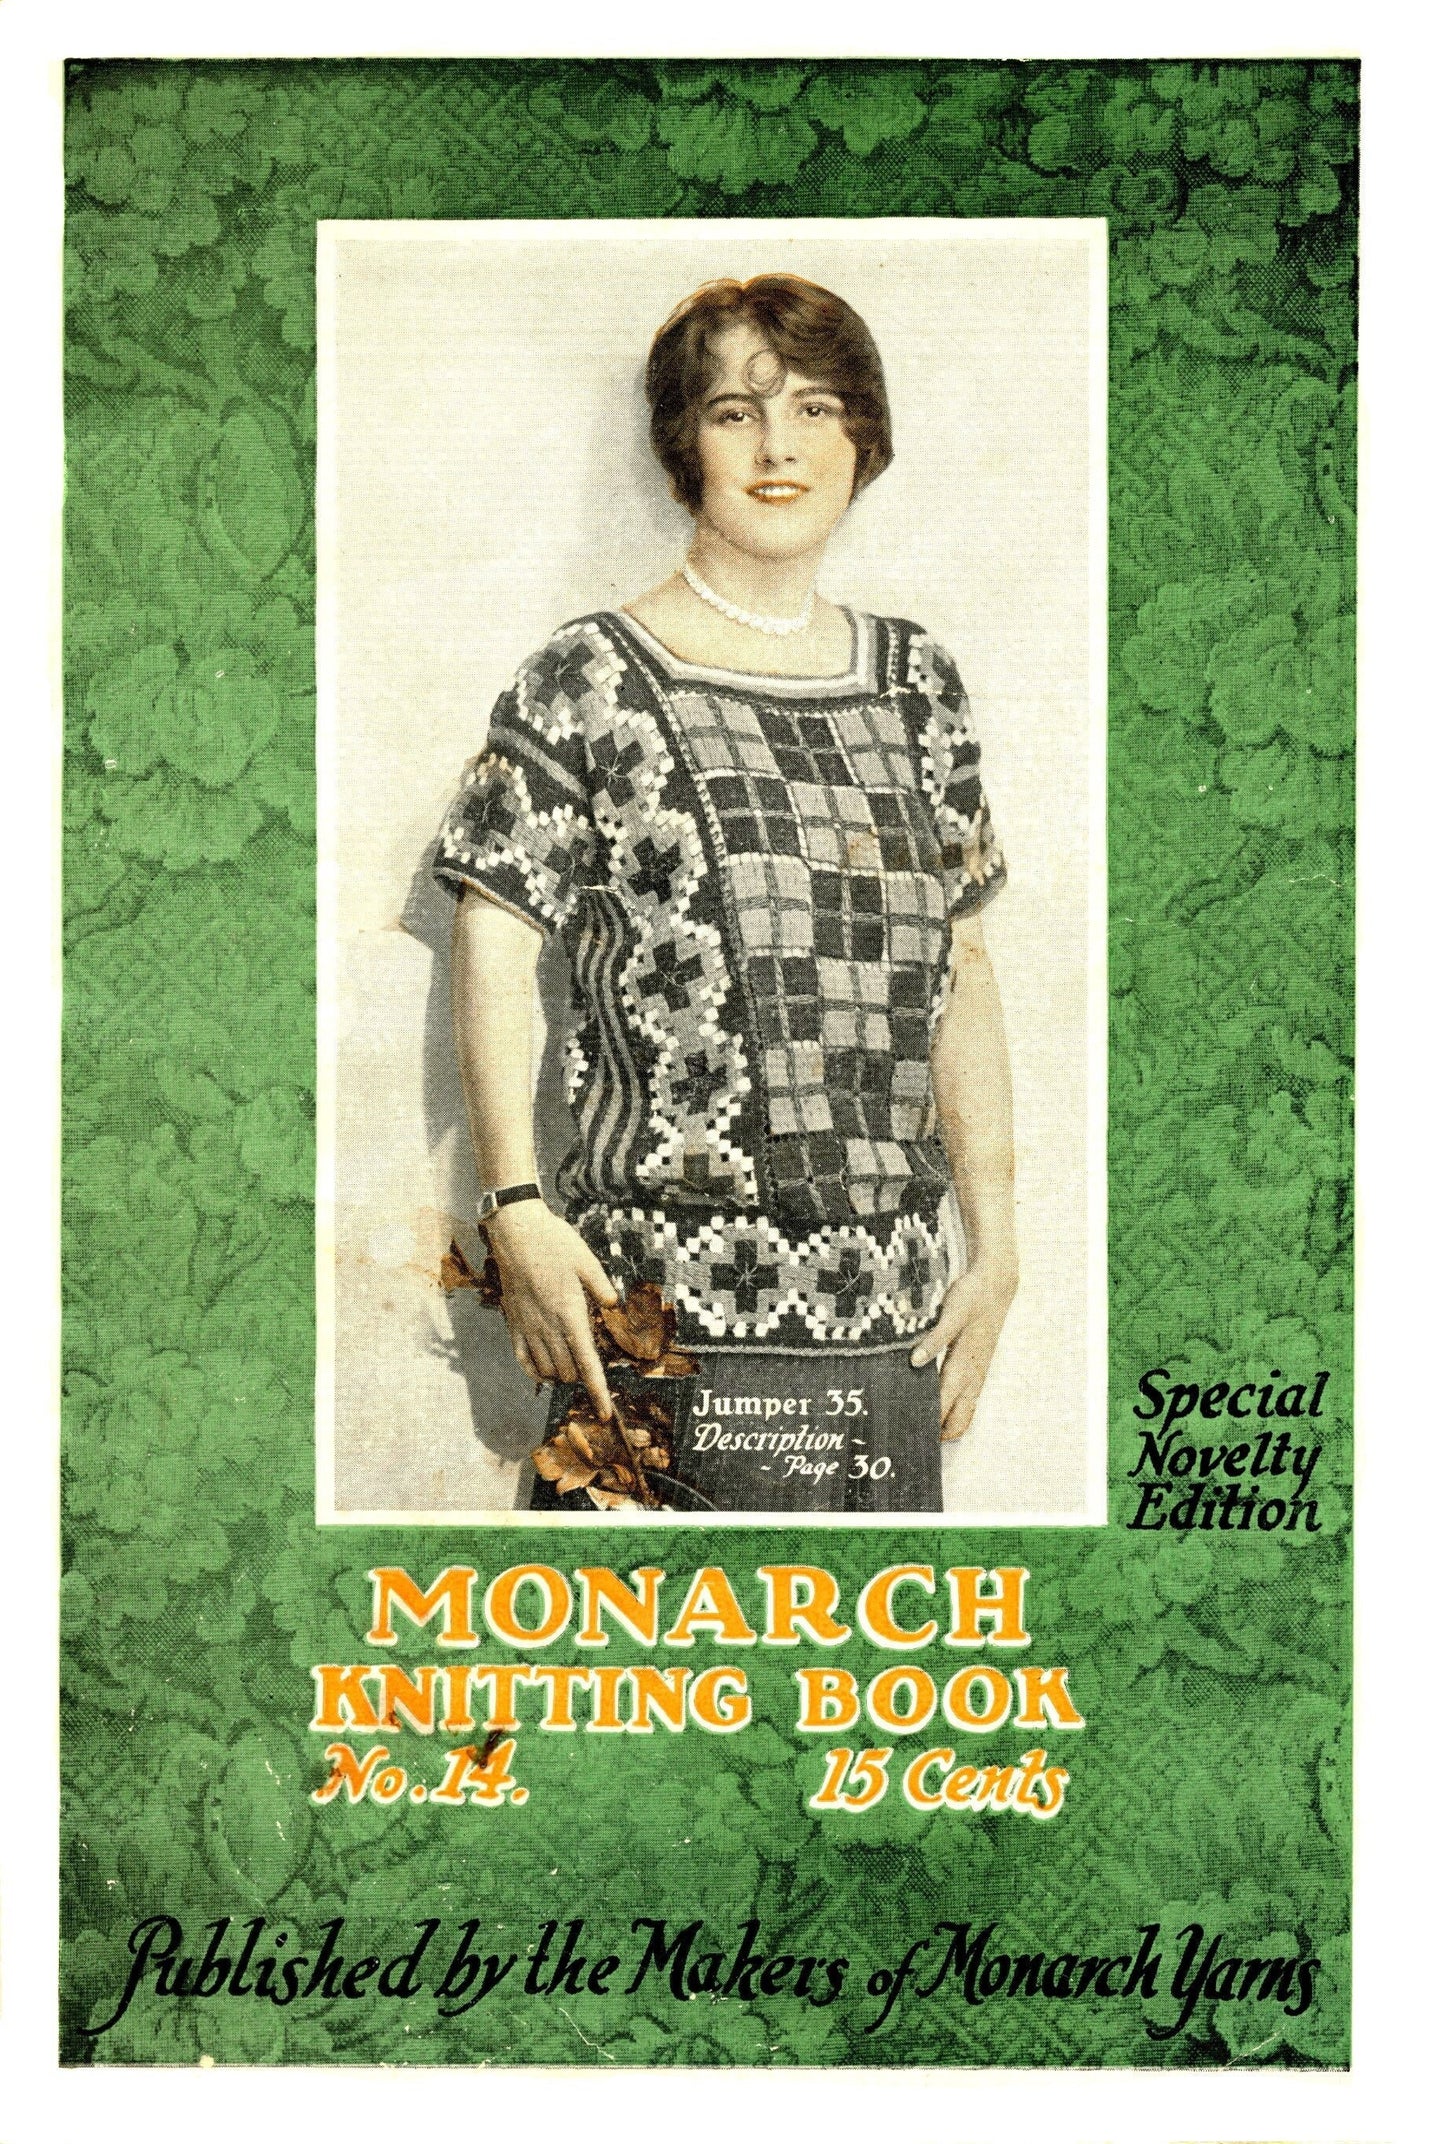 E-BOOK 1924 1920s Novelty Sweater Knitting Book- Monarch Yarns- Knitting Crochet- Ladies Sweaters & Wraps- 20s